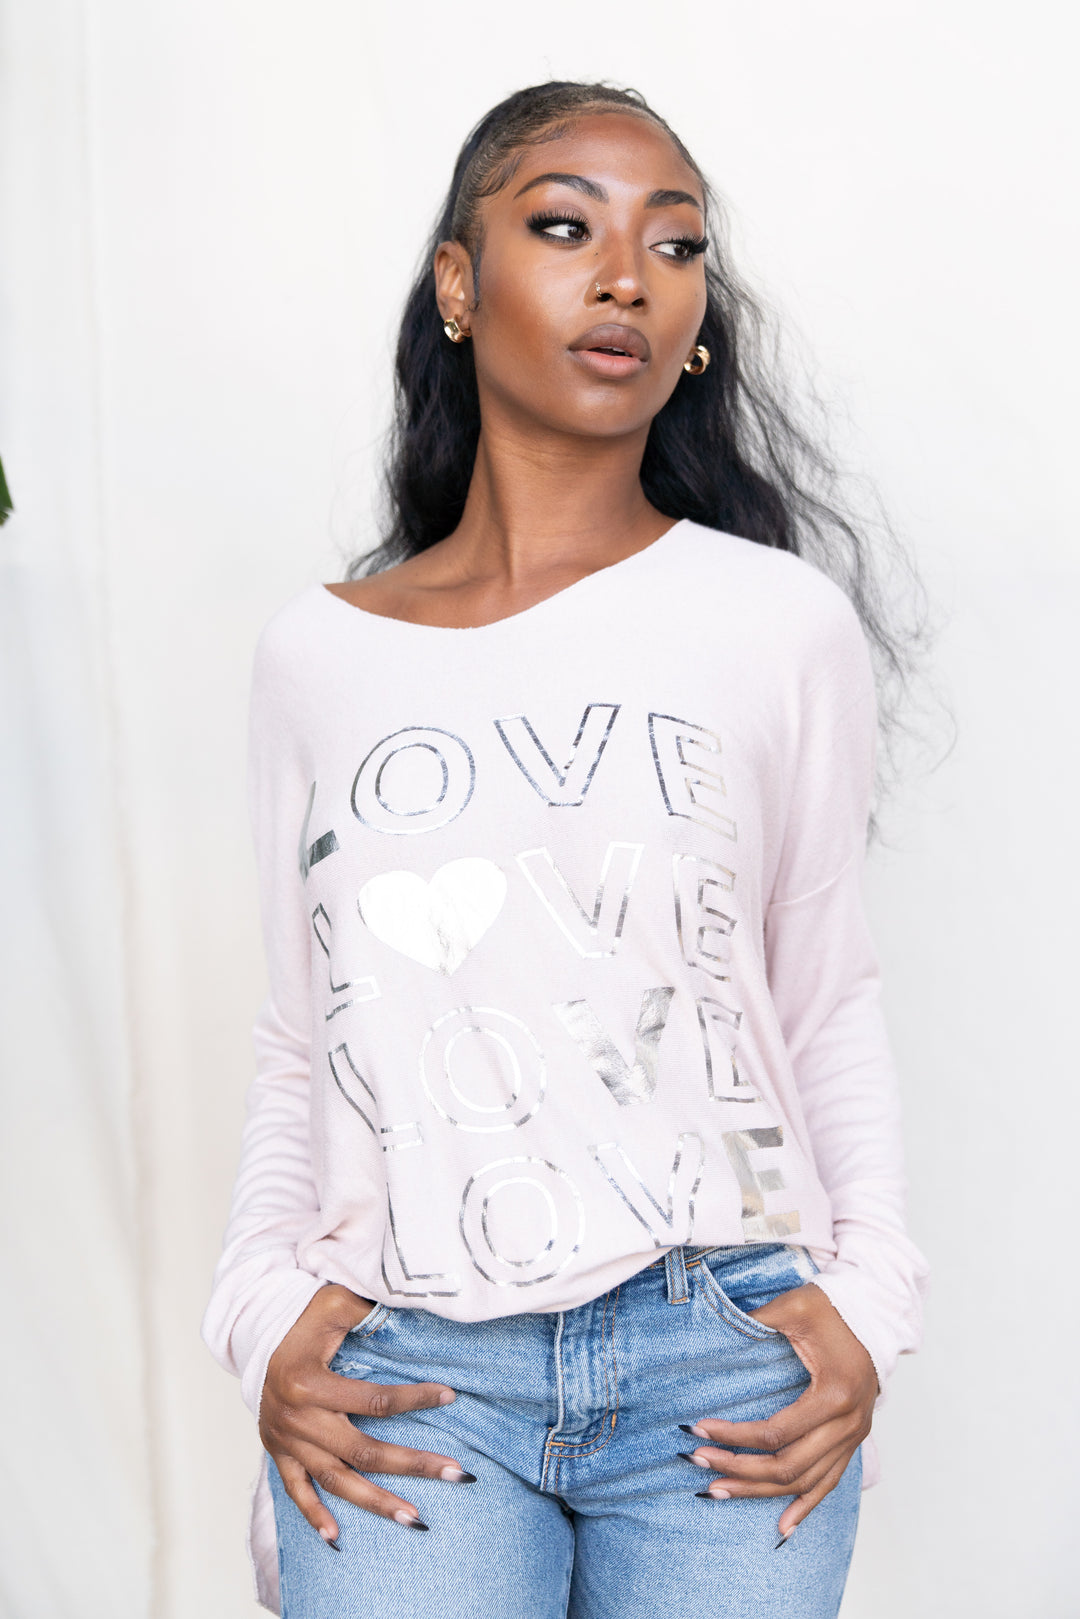 Soft & Cozzy LOVE Graphic Letters Print Sweater